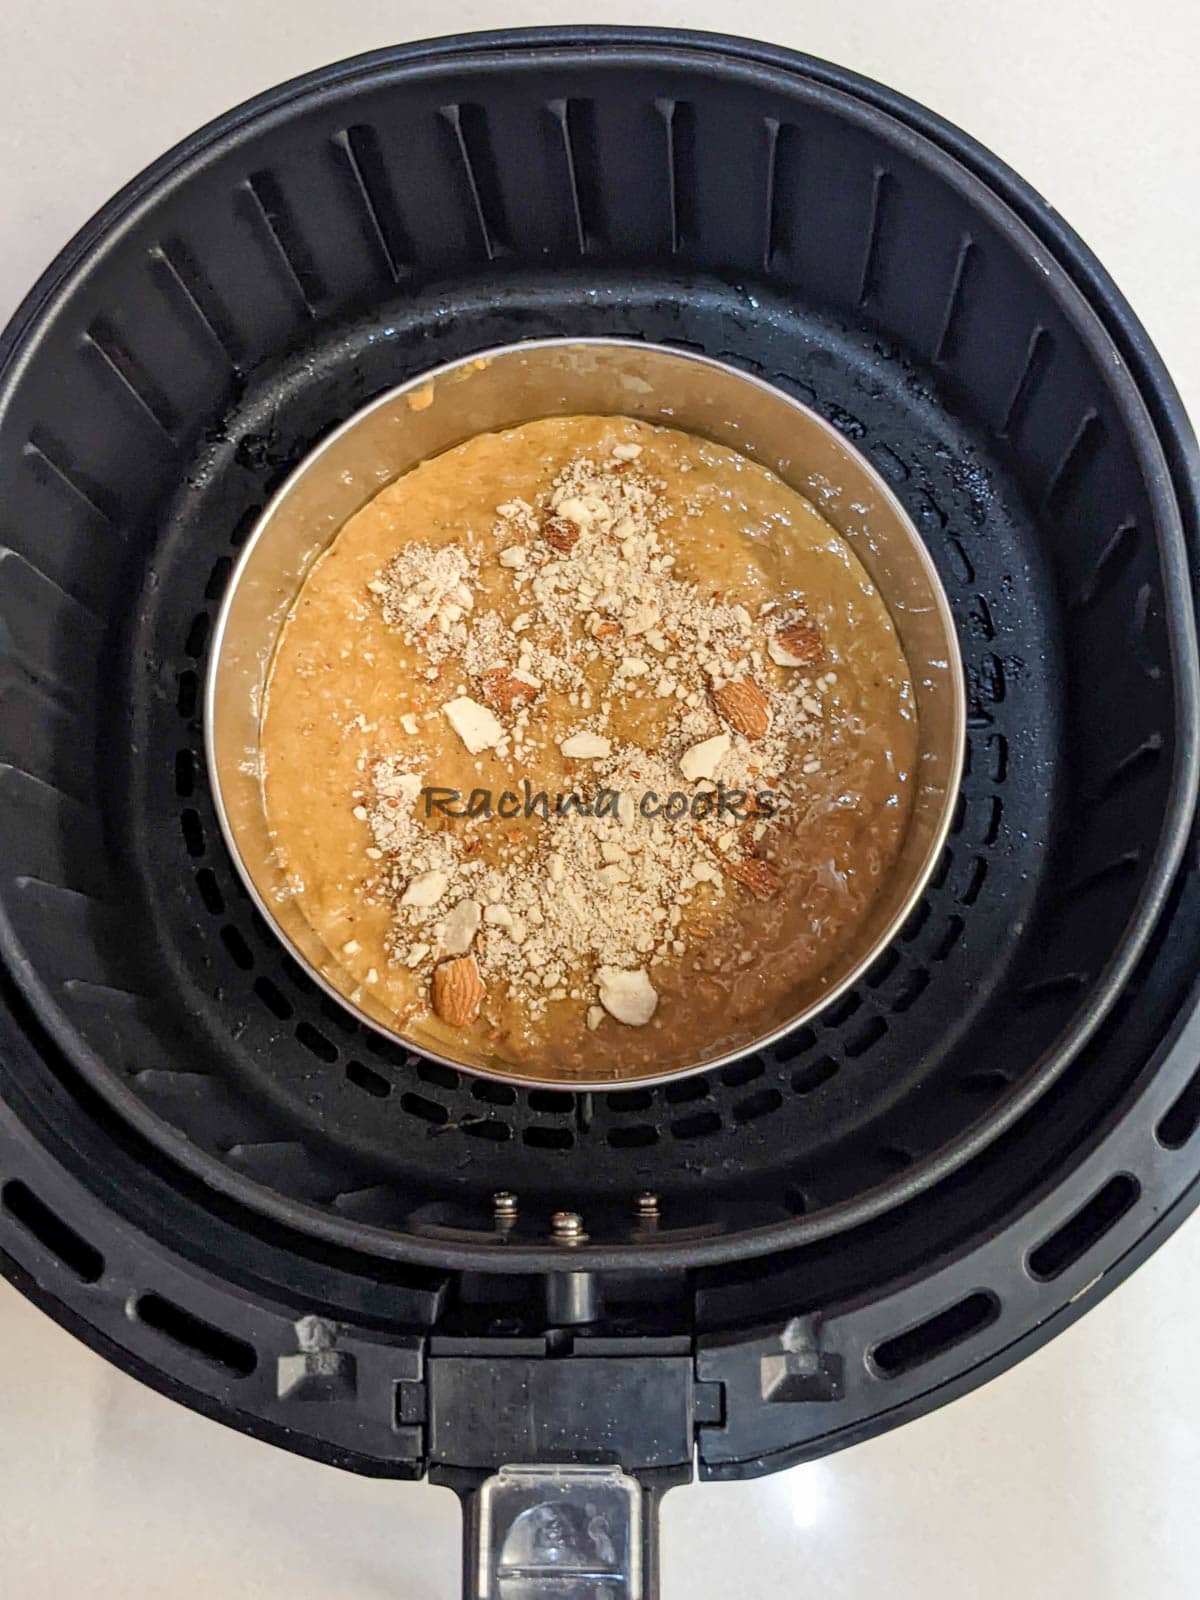 Cake tin with banana bread batter garnished with almond slivers is placed in air fryer basket ready for air frying.